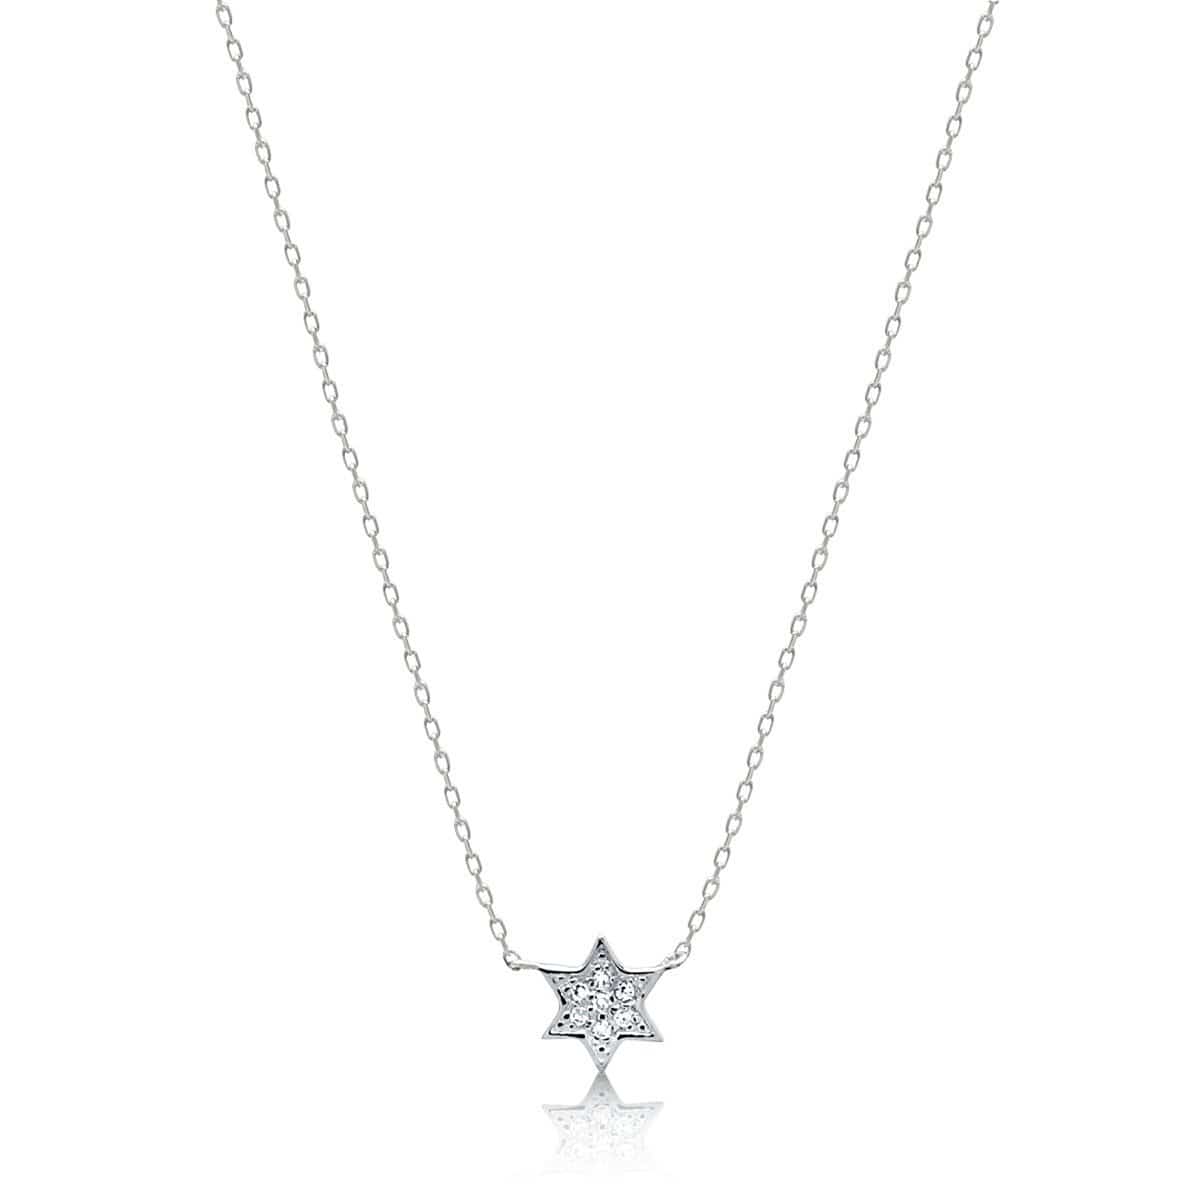 Petite Diamond Jewish Star Necklace in 14k Gold, White Gold or Rose Gold |  ModernTribe | Reviews on Judge.me